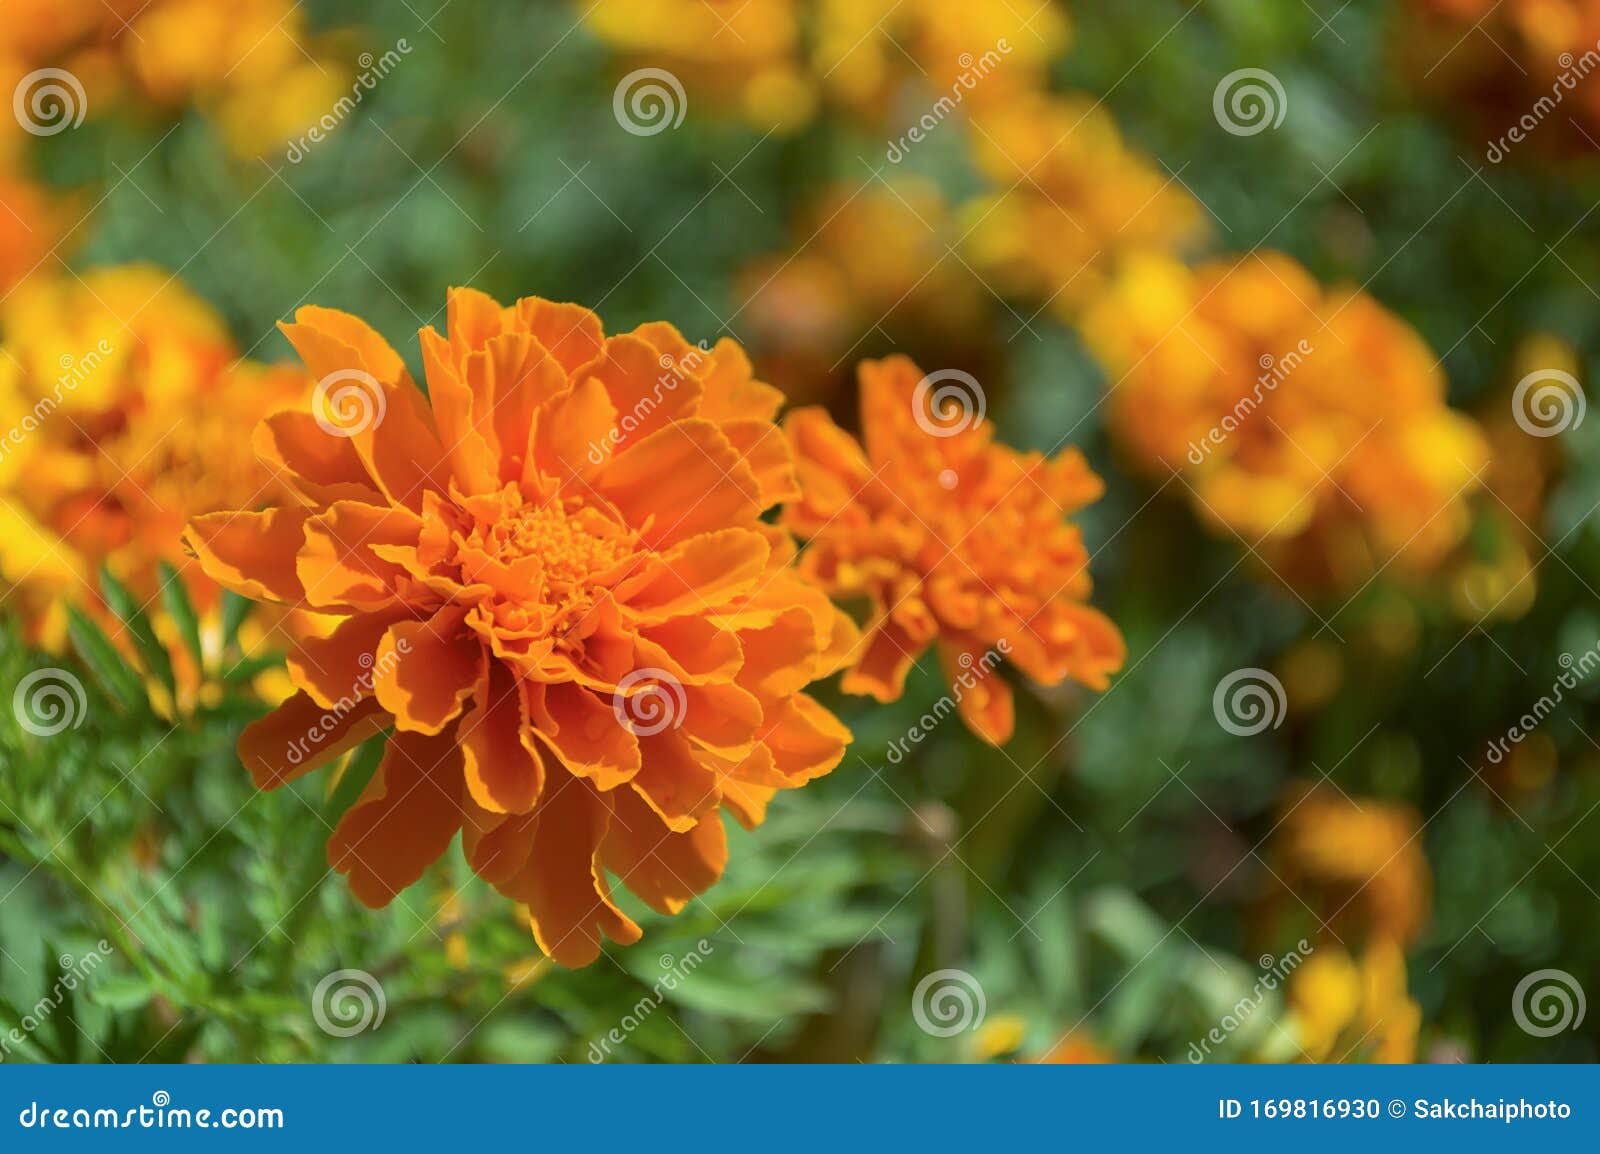 Marigolds Shades of Orange in the Garden Stock Photo - Image of ...